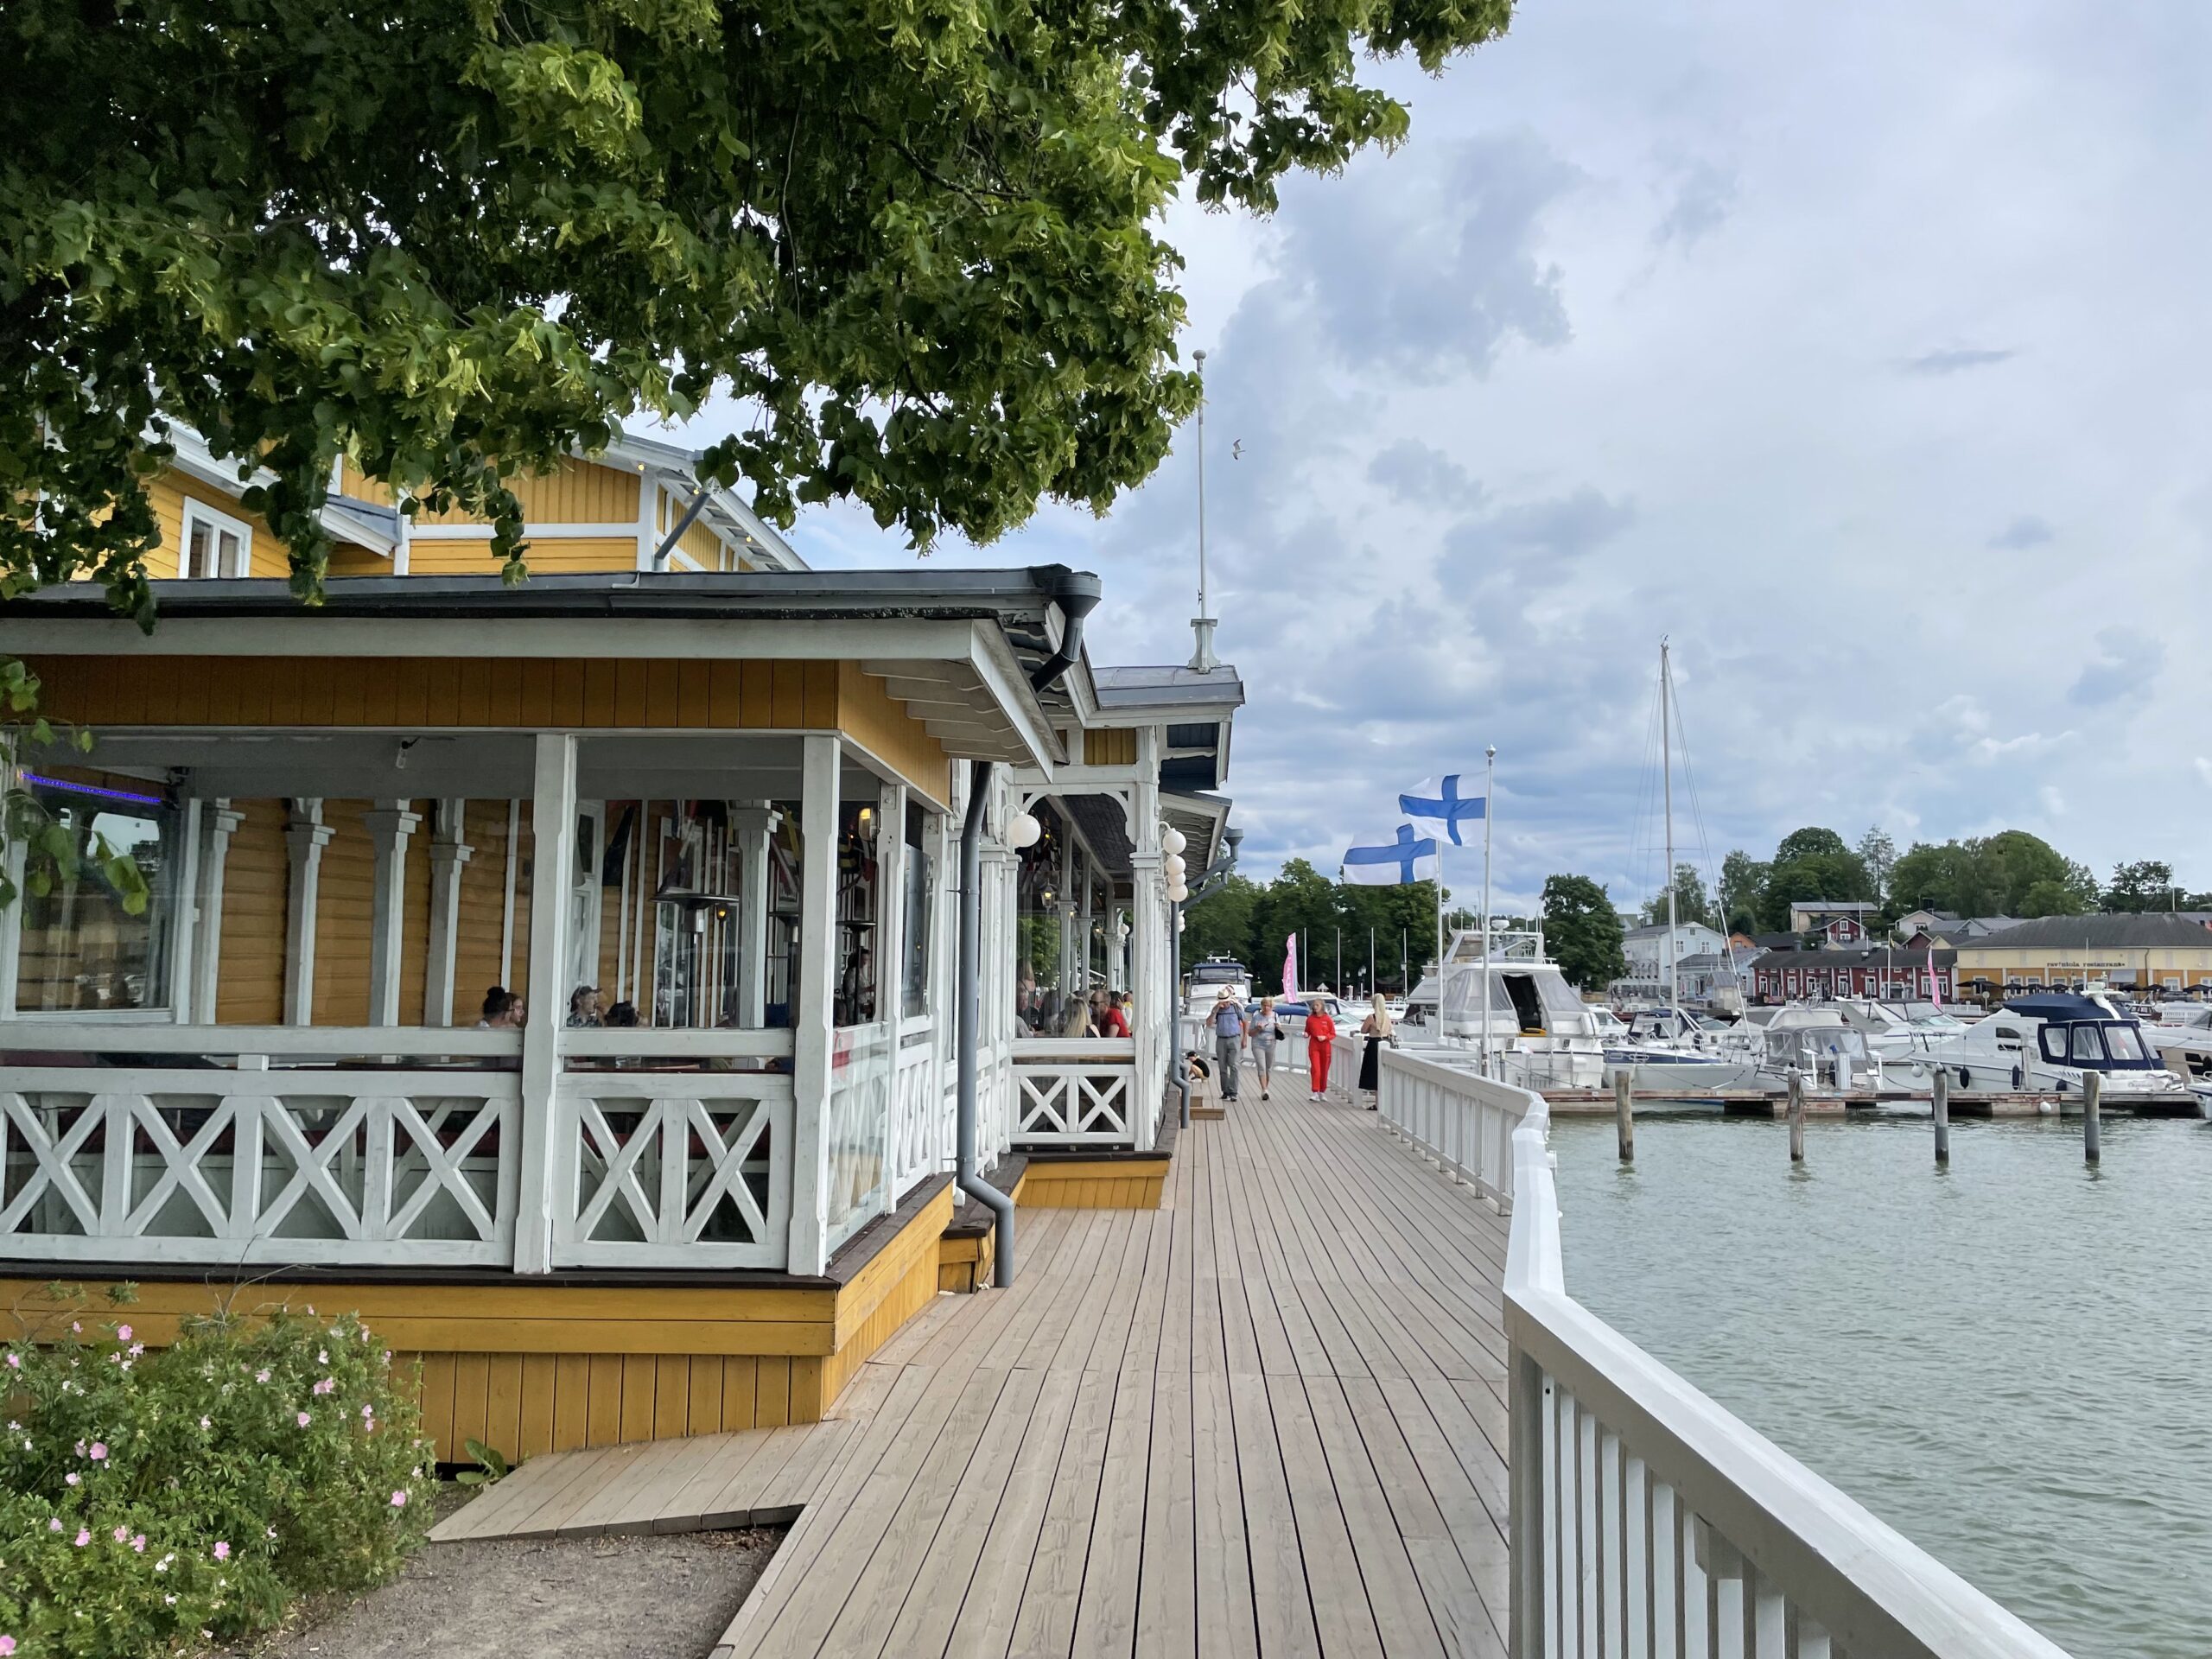 What to see in Naantali ? Visiting charming places in Finland.